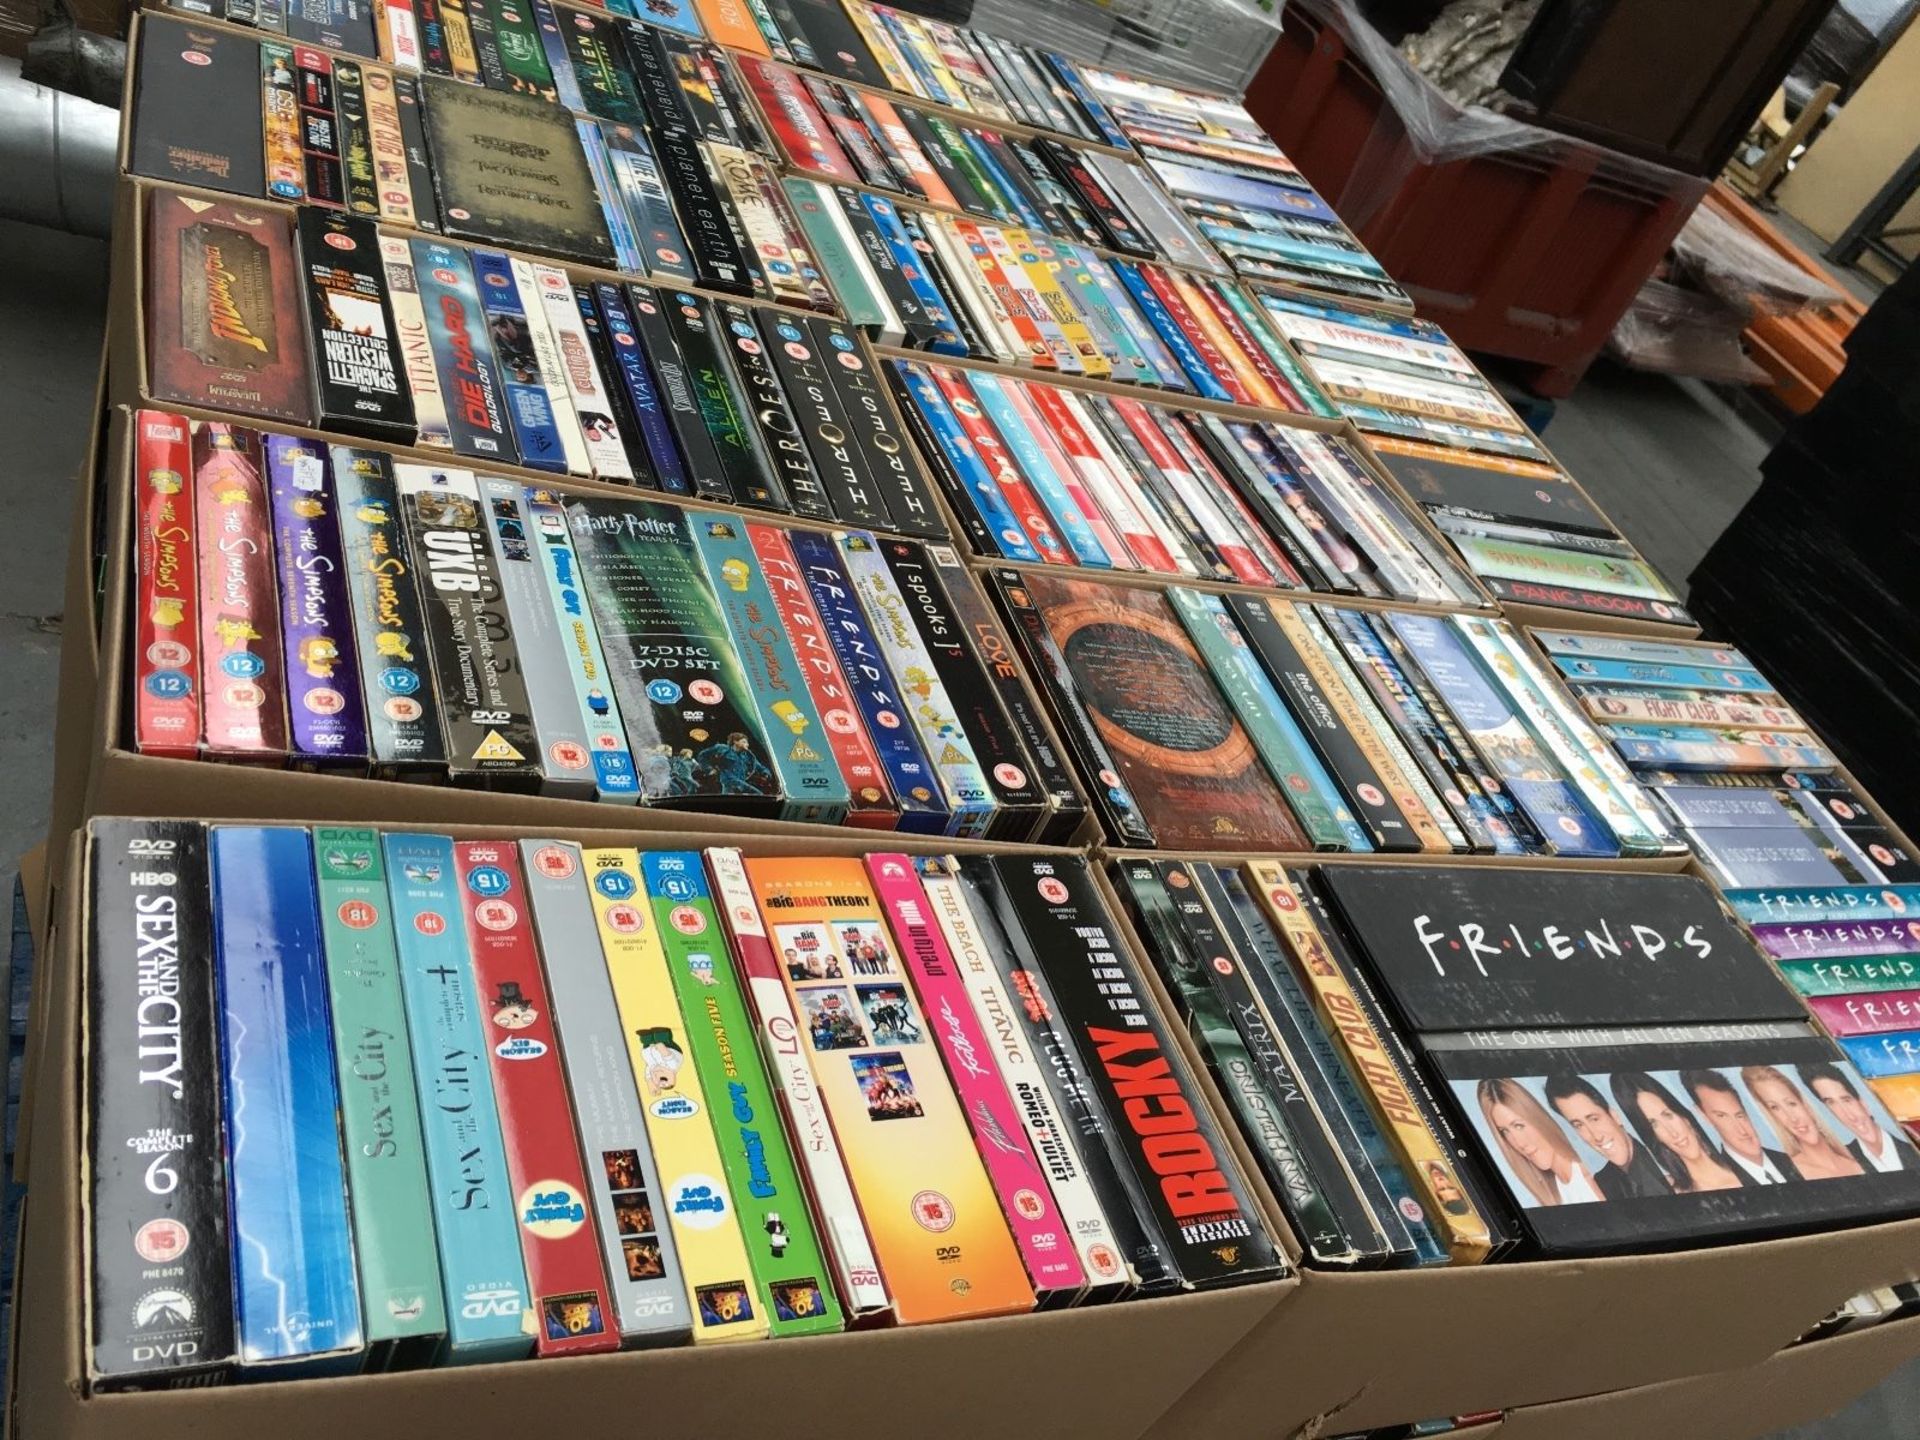 JOB LOT OF 100 x VARIOUS DVD'S - REGION 2 - USED - GOOD ASSORTMENT OF TITLES - NO RESERVE - Image 3 of 5